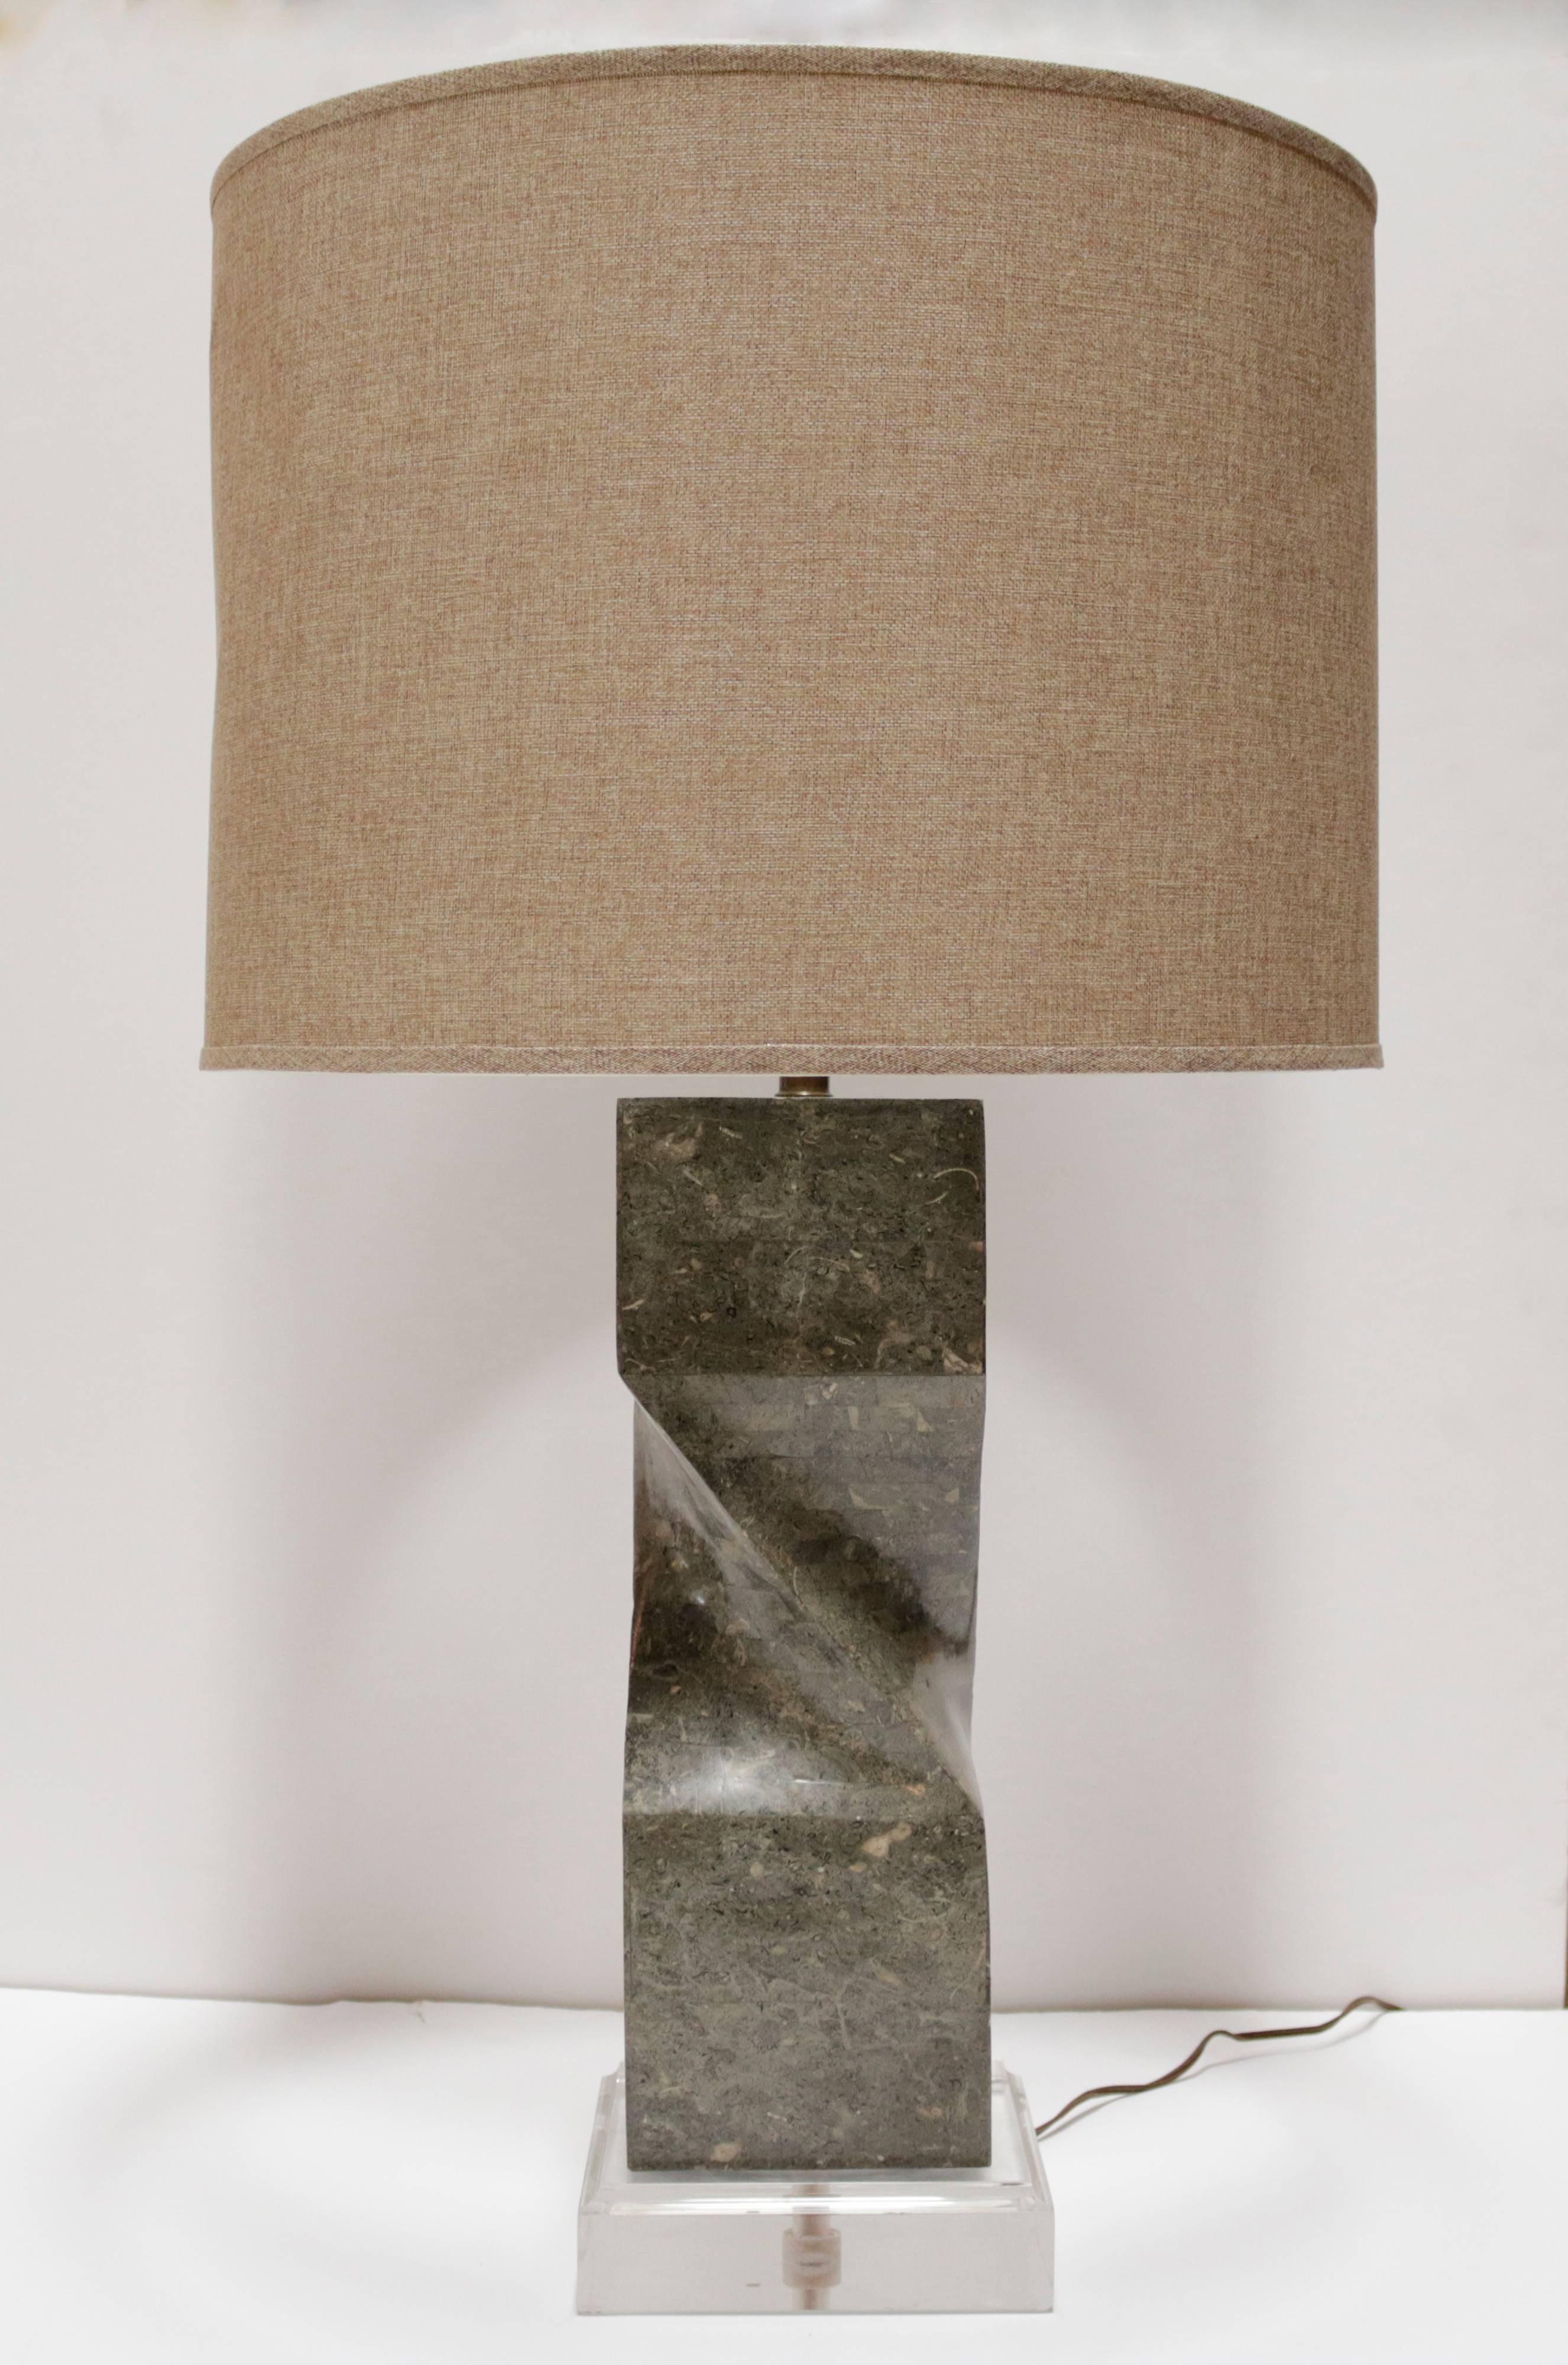 Large table lamp on a Lucite base with beige linen shade. Lamp is made of tessellated sage green colored marble pieces, with an interesting twist detail at the center. Measures 21